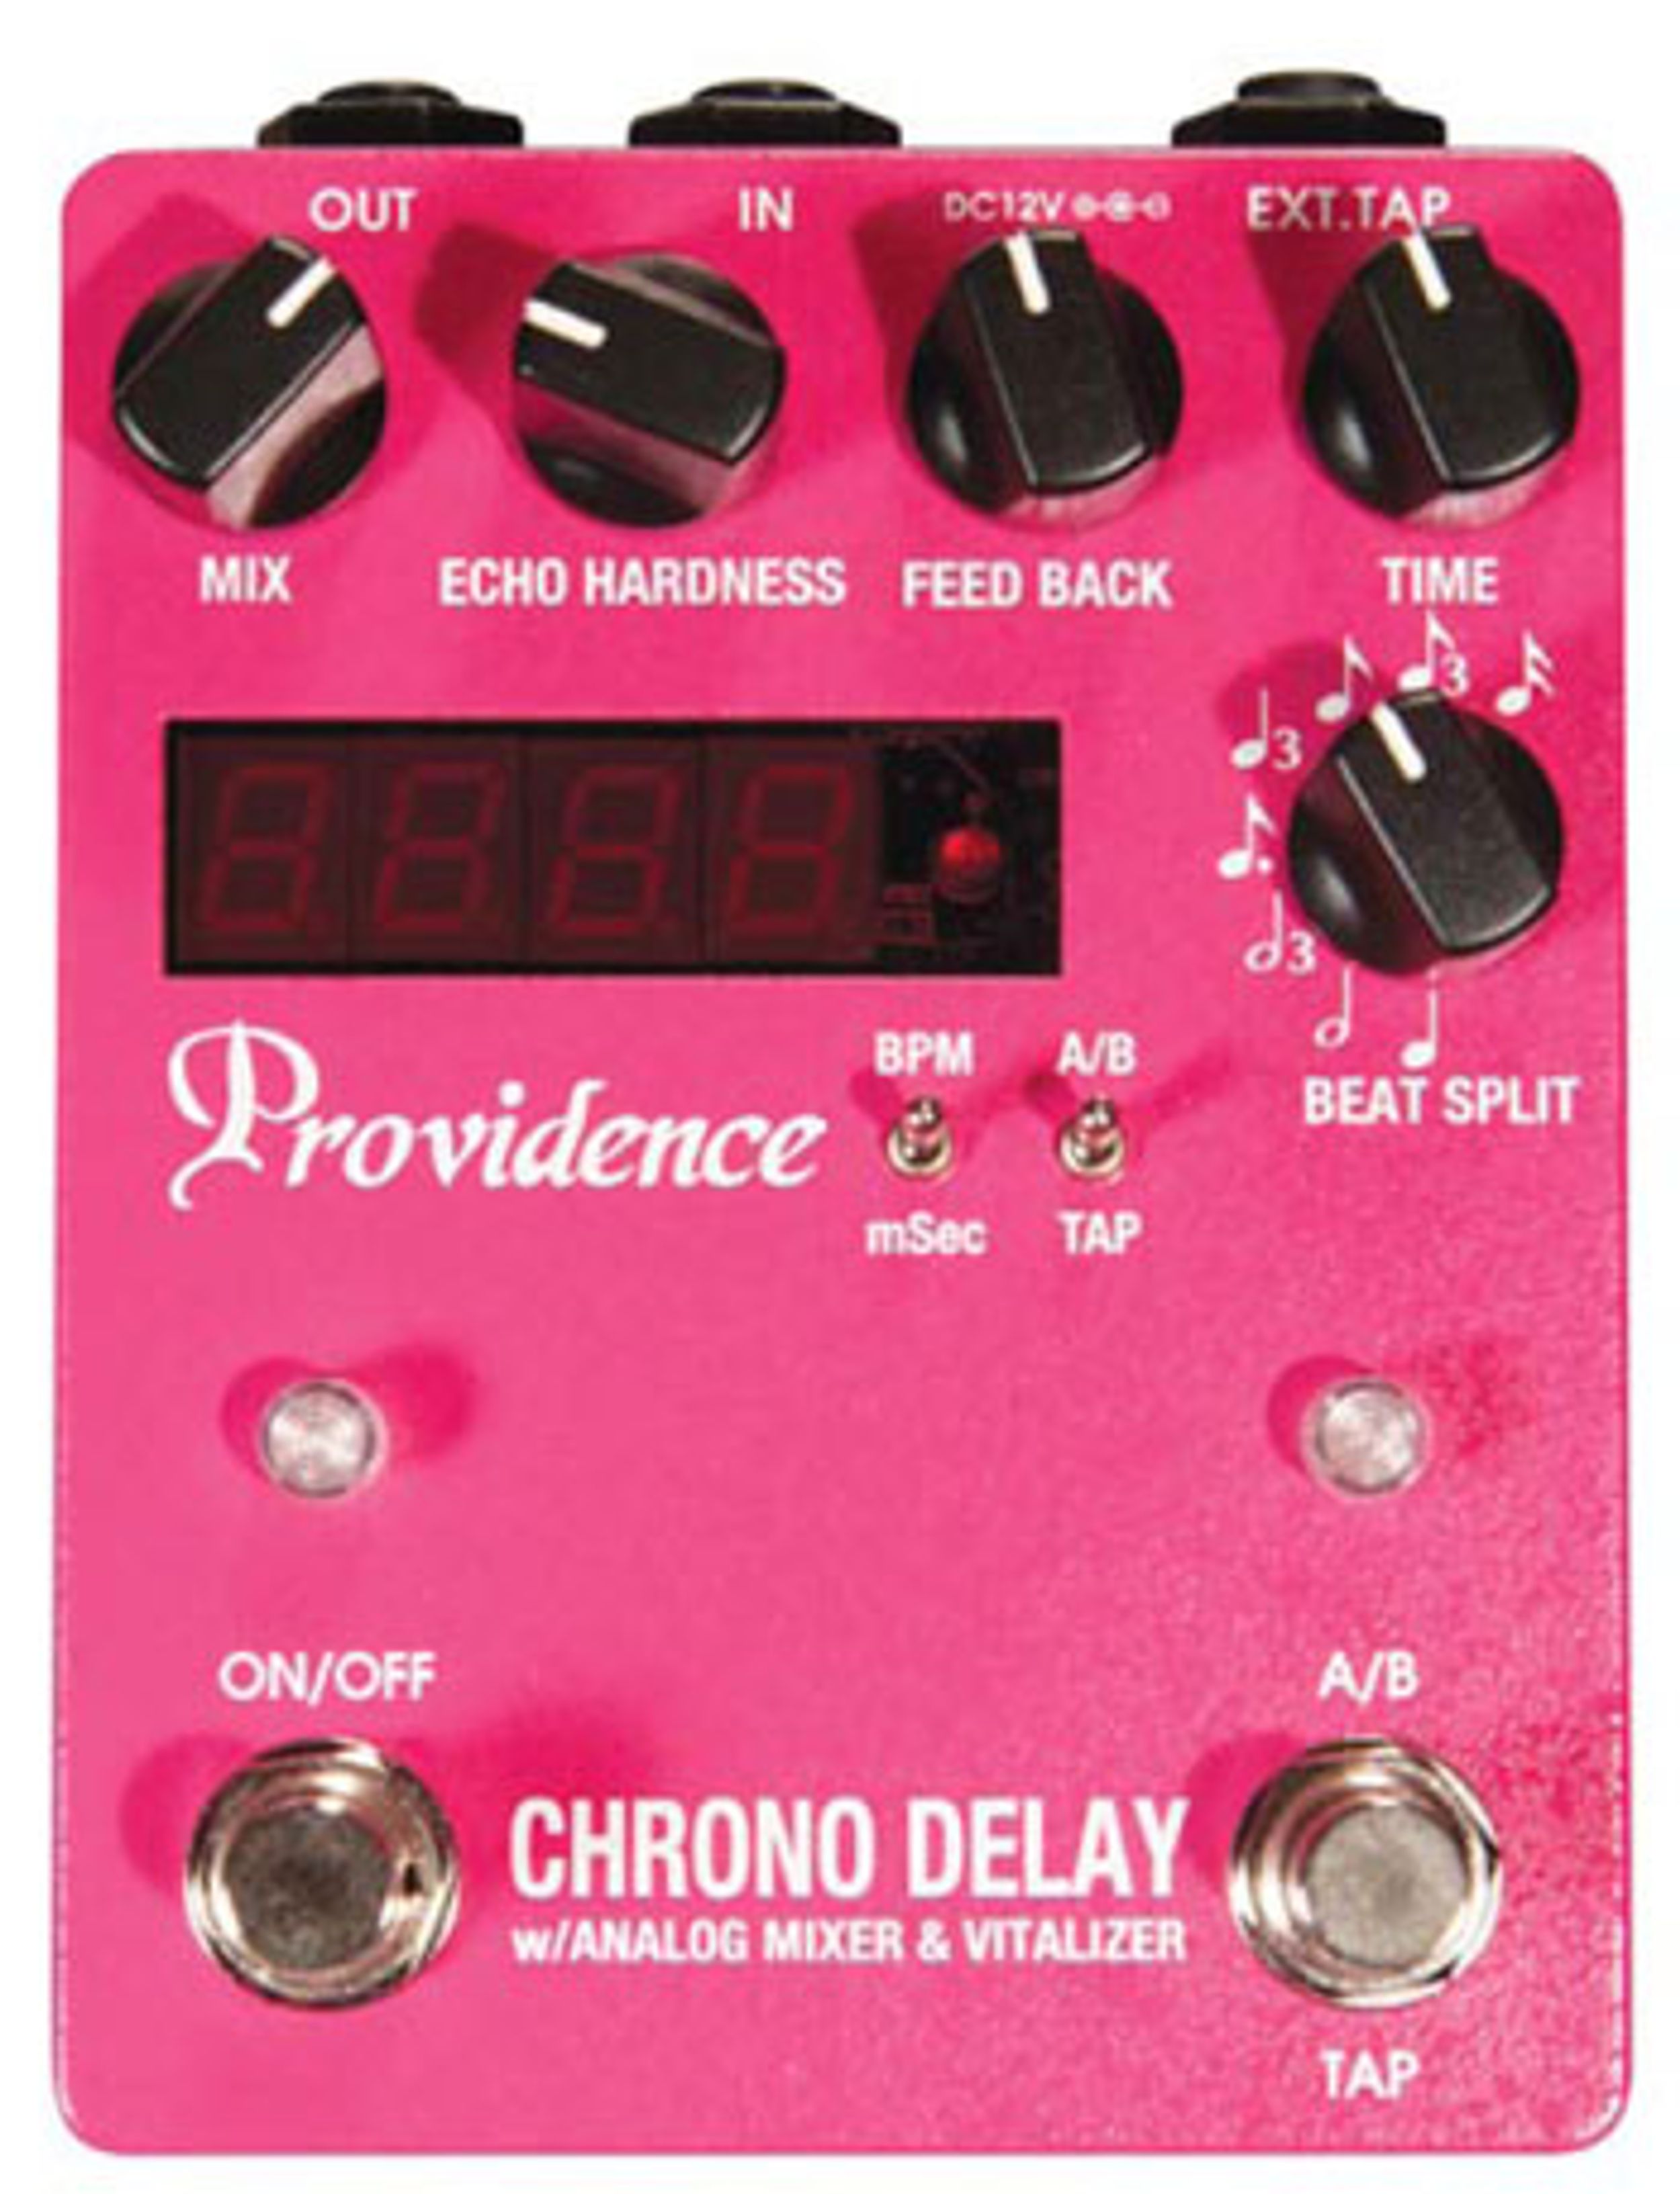 Providence Chrono Delay DLY-4 Pedal Review